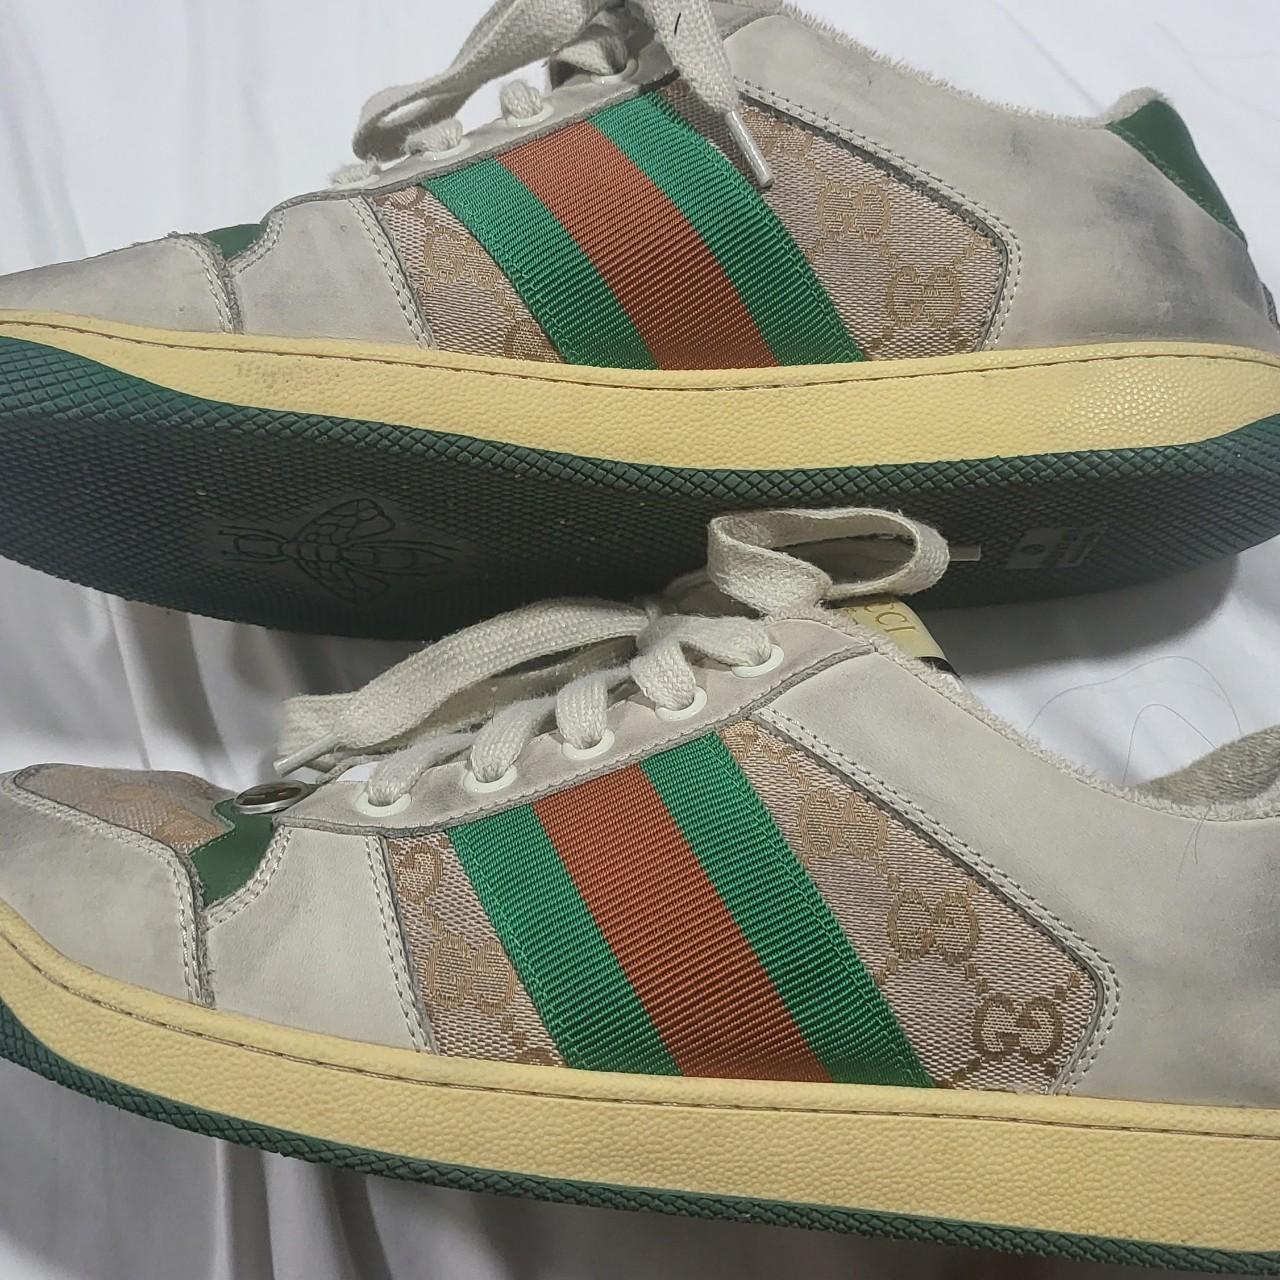 Gucci Men's Cream and Green Trainers | Depop